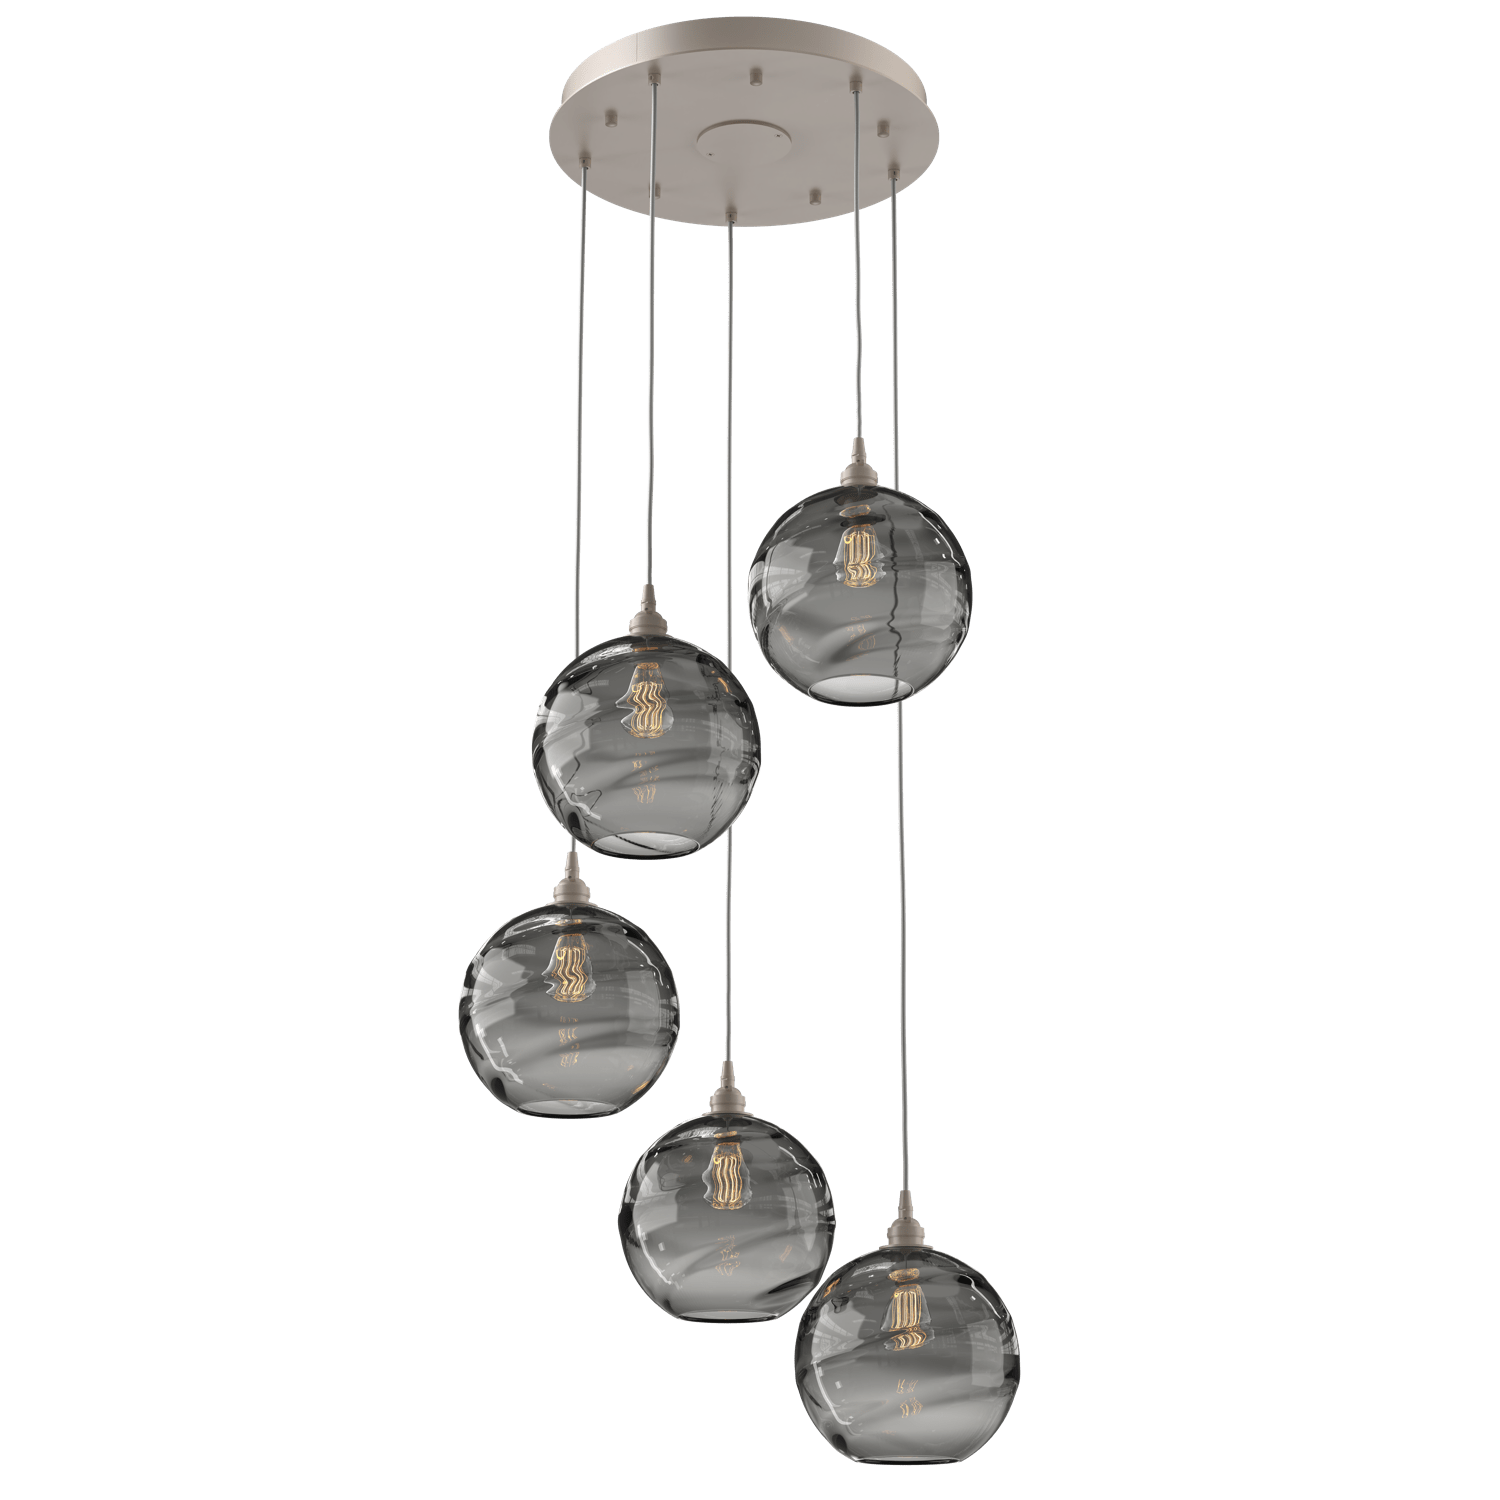 CHB0047-05-BS-OS-Hammerton-Studio-Optic-Blown-Glass-Terra-5-light-round-pendant-chandelier-with-metallic-beige-silver-finish-and-optic-smoke-blown-glass-shades-and-incandescent-lamping